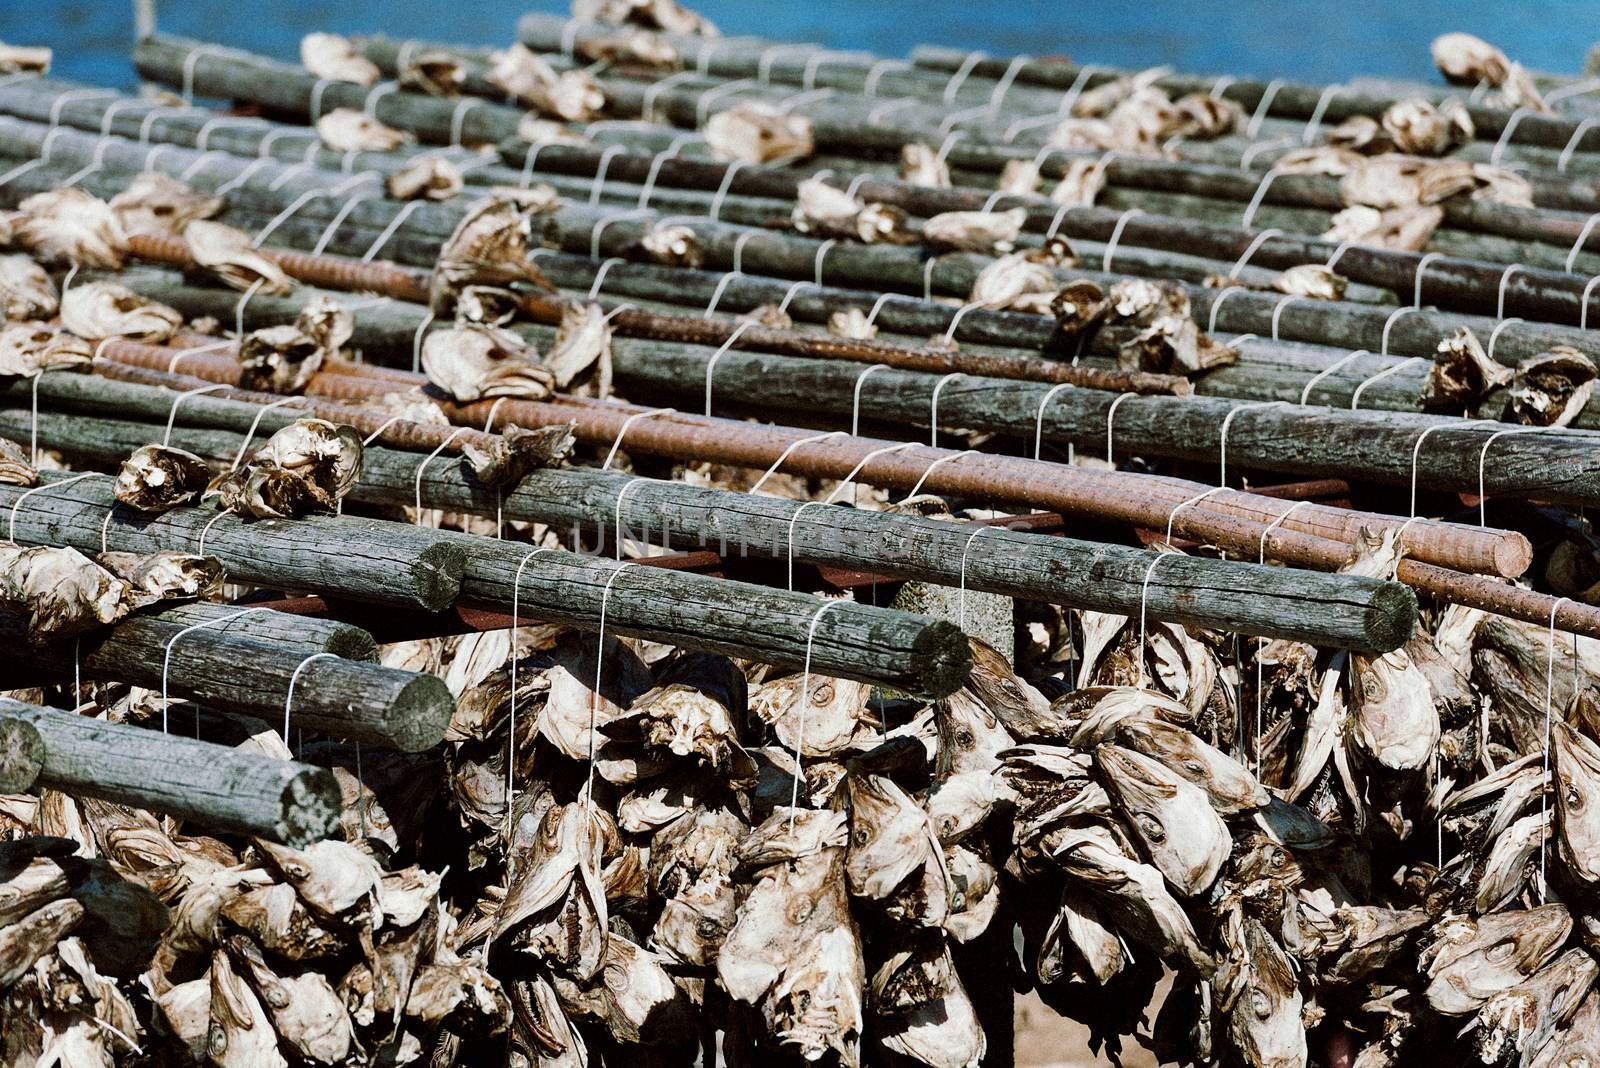 Cod fish dried by cold air and wind on wooden racks on the foreshore in Lofoten islands. The drying of food is the world's oldest known preservation method used since Viking era. Norwegian tradition.